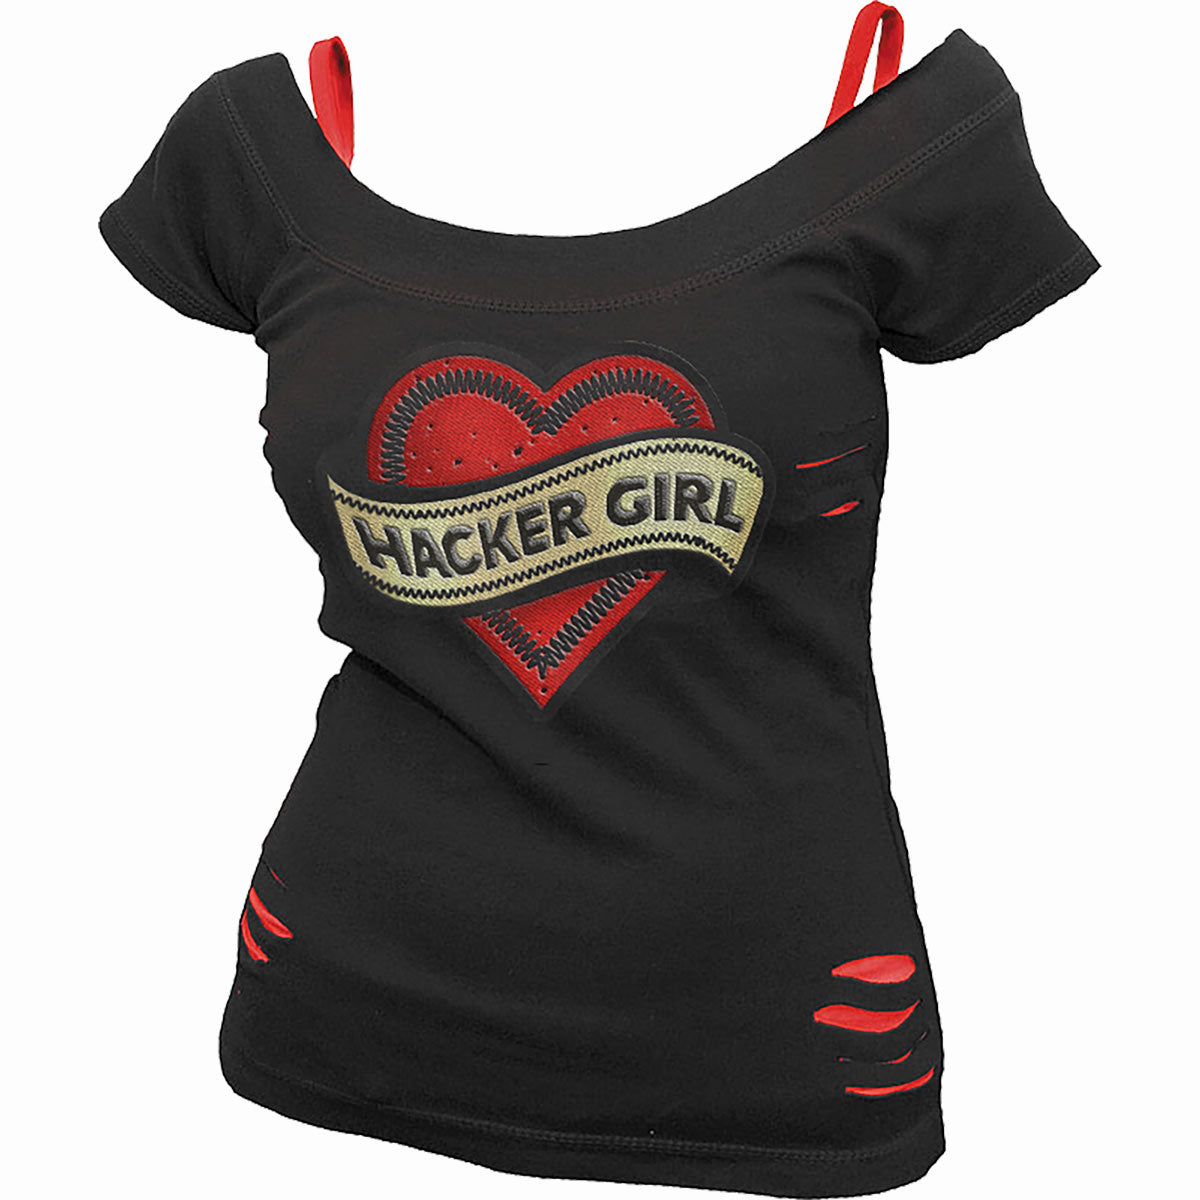 HACKER GIRL PATCH - 2in1 Red Ripped Top Black